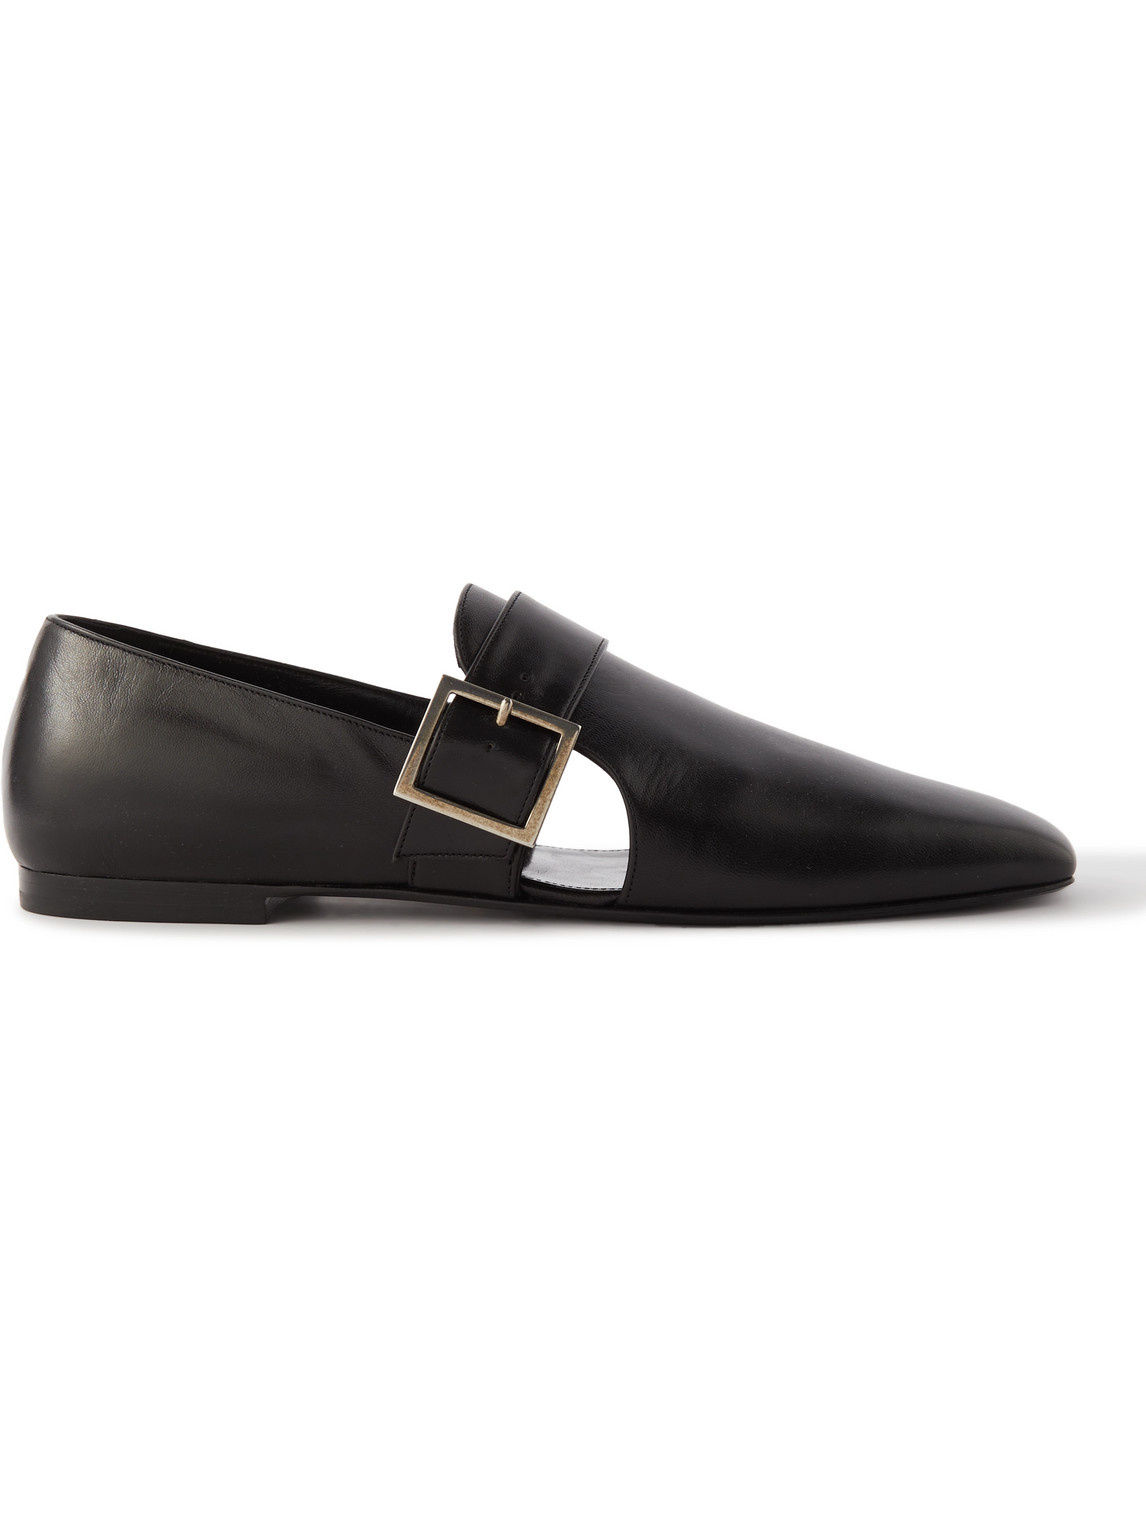 Saint Laurent Tristan Leather Slippers In 블랙